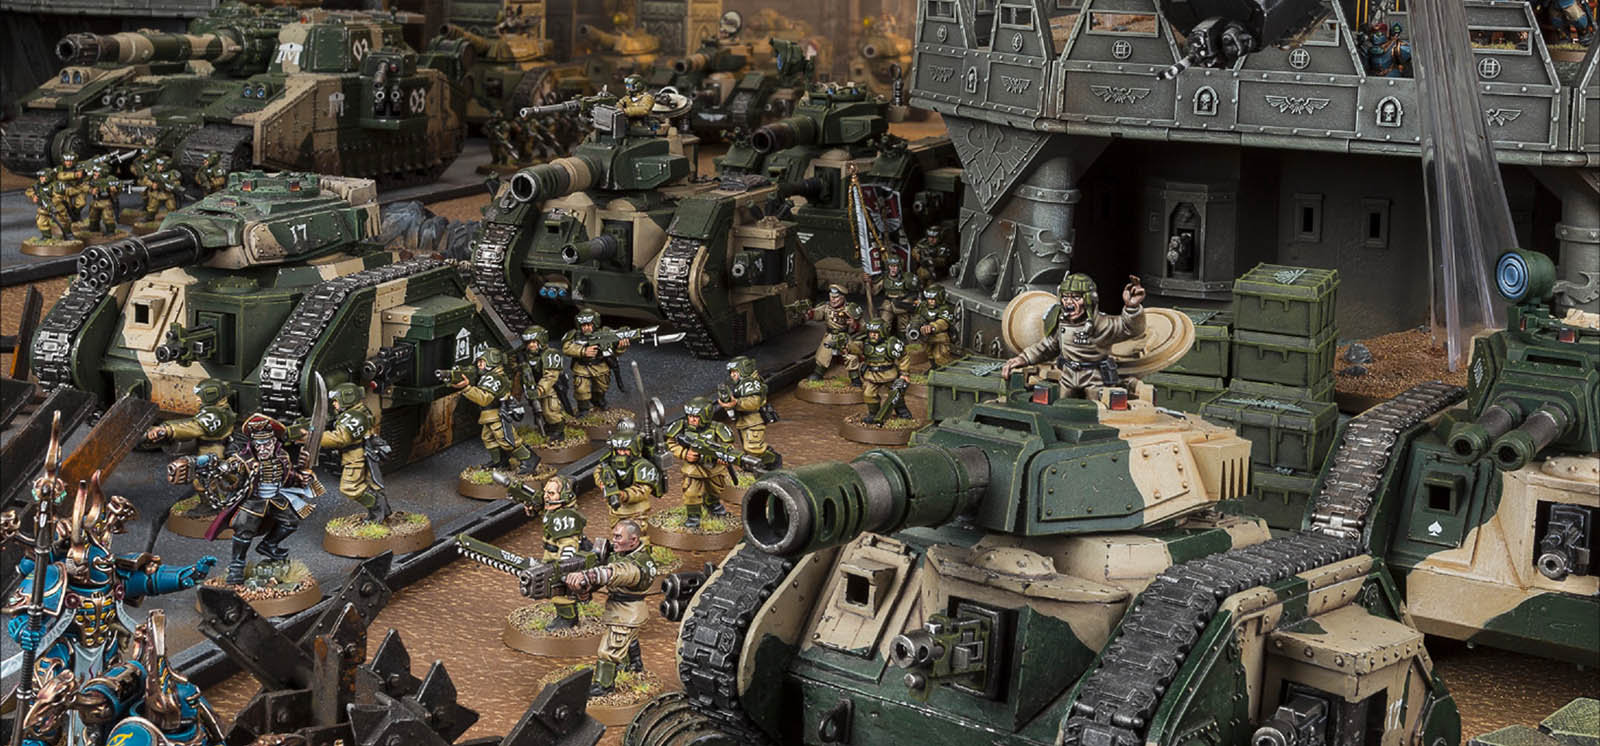 How To Play Astra Militarum In Warhammer 40K - Bell of Lost Souls